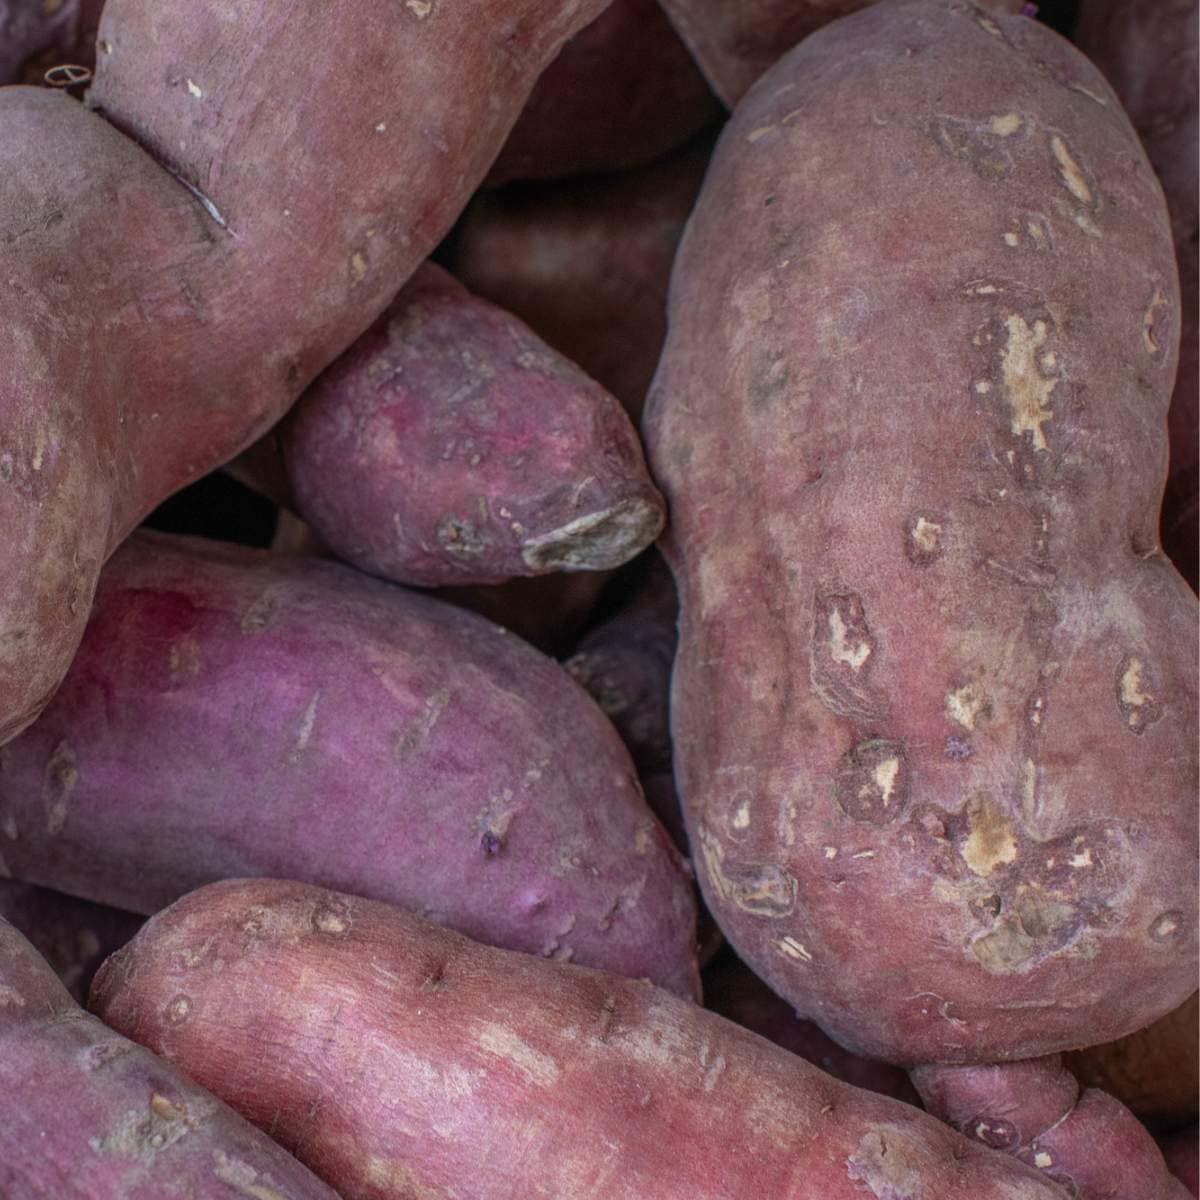 A close up of a pile of purple sweet potatoes.